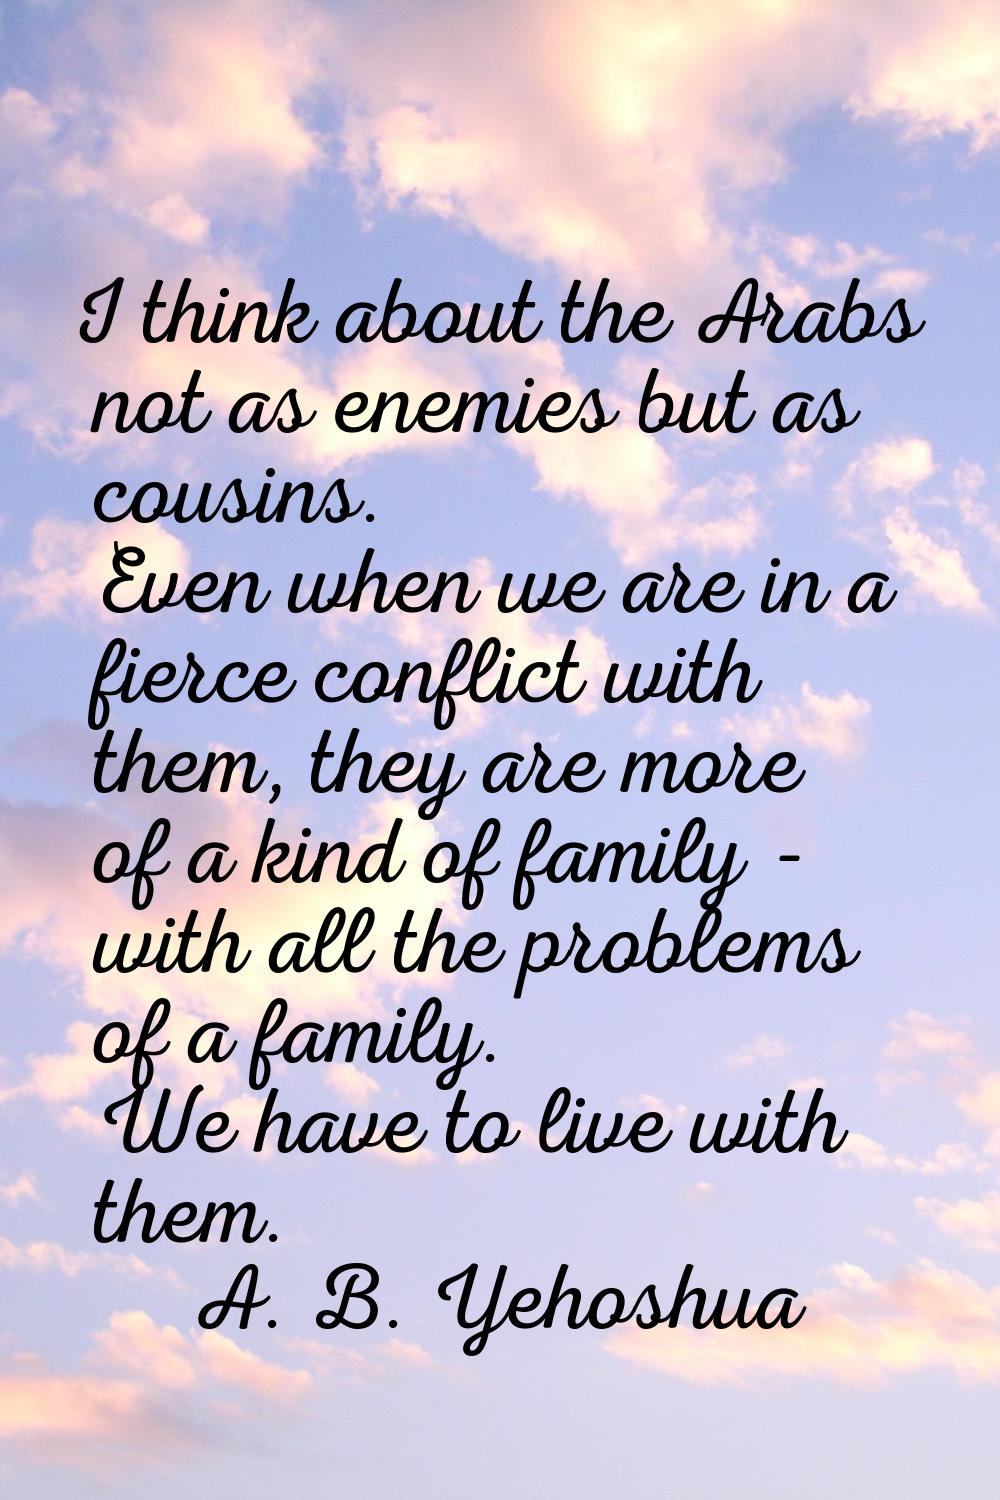 I think about the Arabs not as enemies but as cousins. Even when we are in a fierce conflict with t